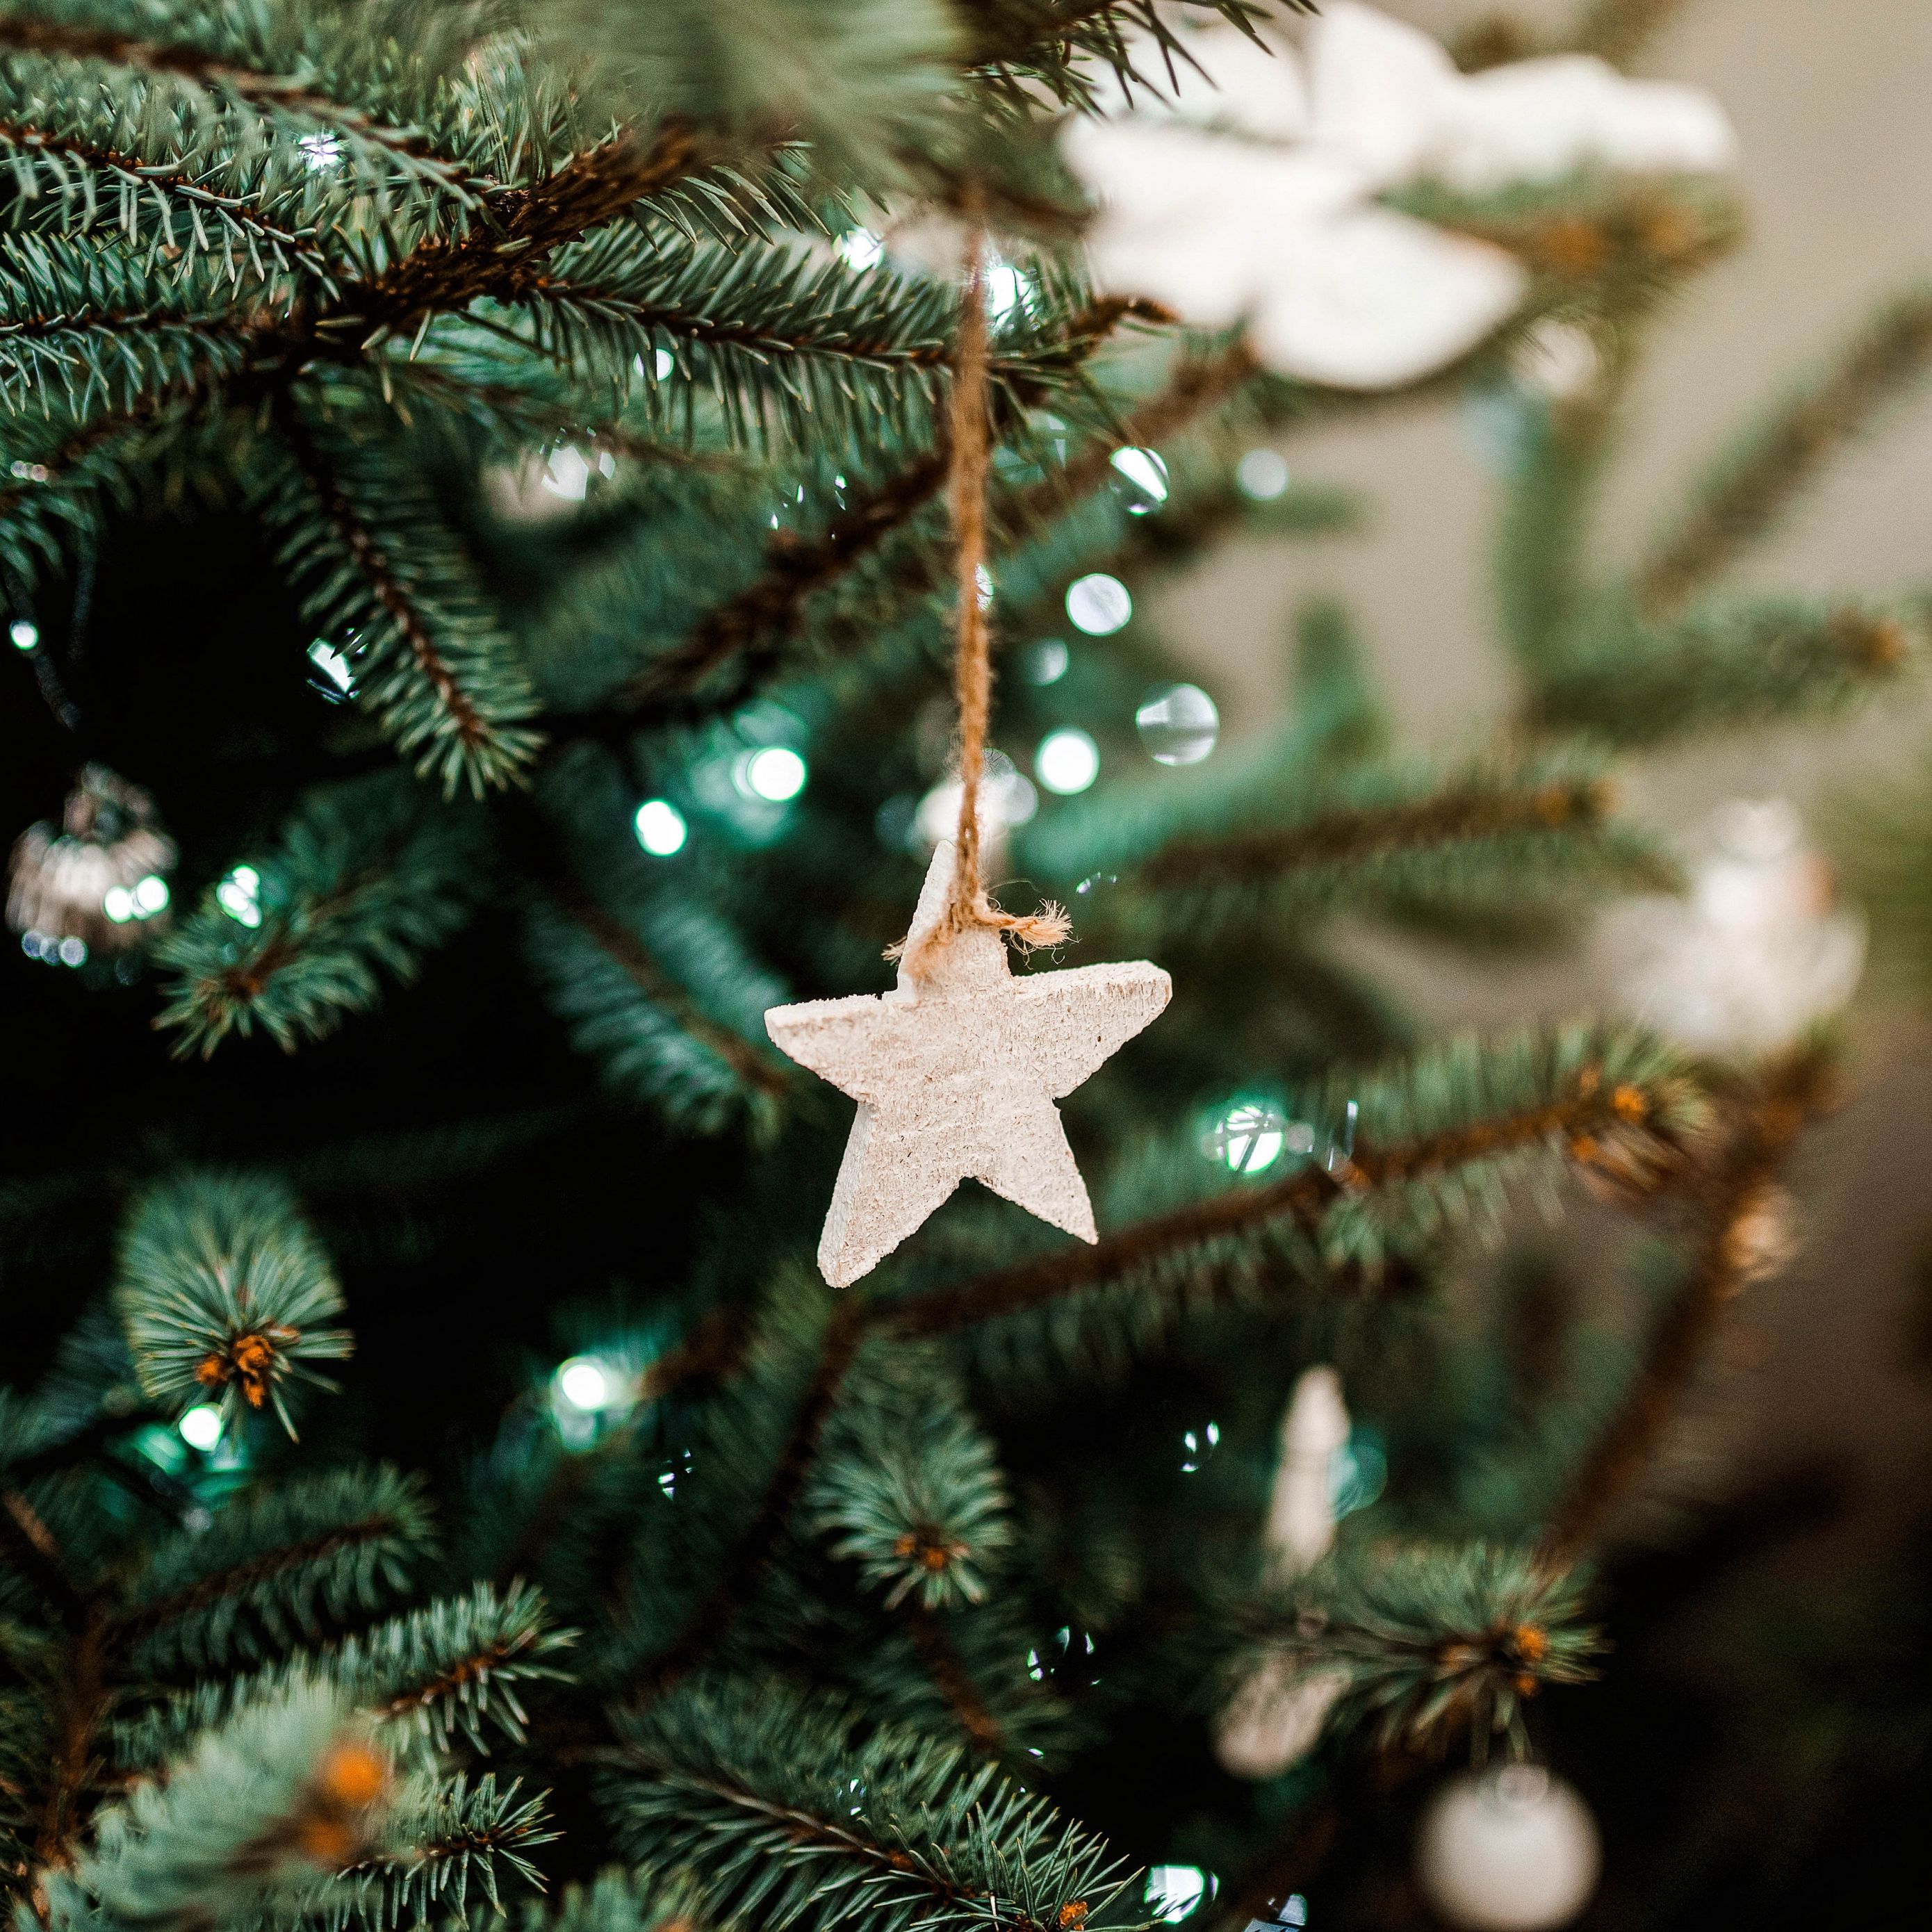 Download wallpaper 2780x2780 christmas tree, star, decoration, new year, christmas ipad air, ipad air ipad ipad ipad mini ipad mini ipad mini ipad pro 9.7 for parallax HD background